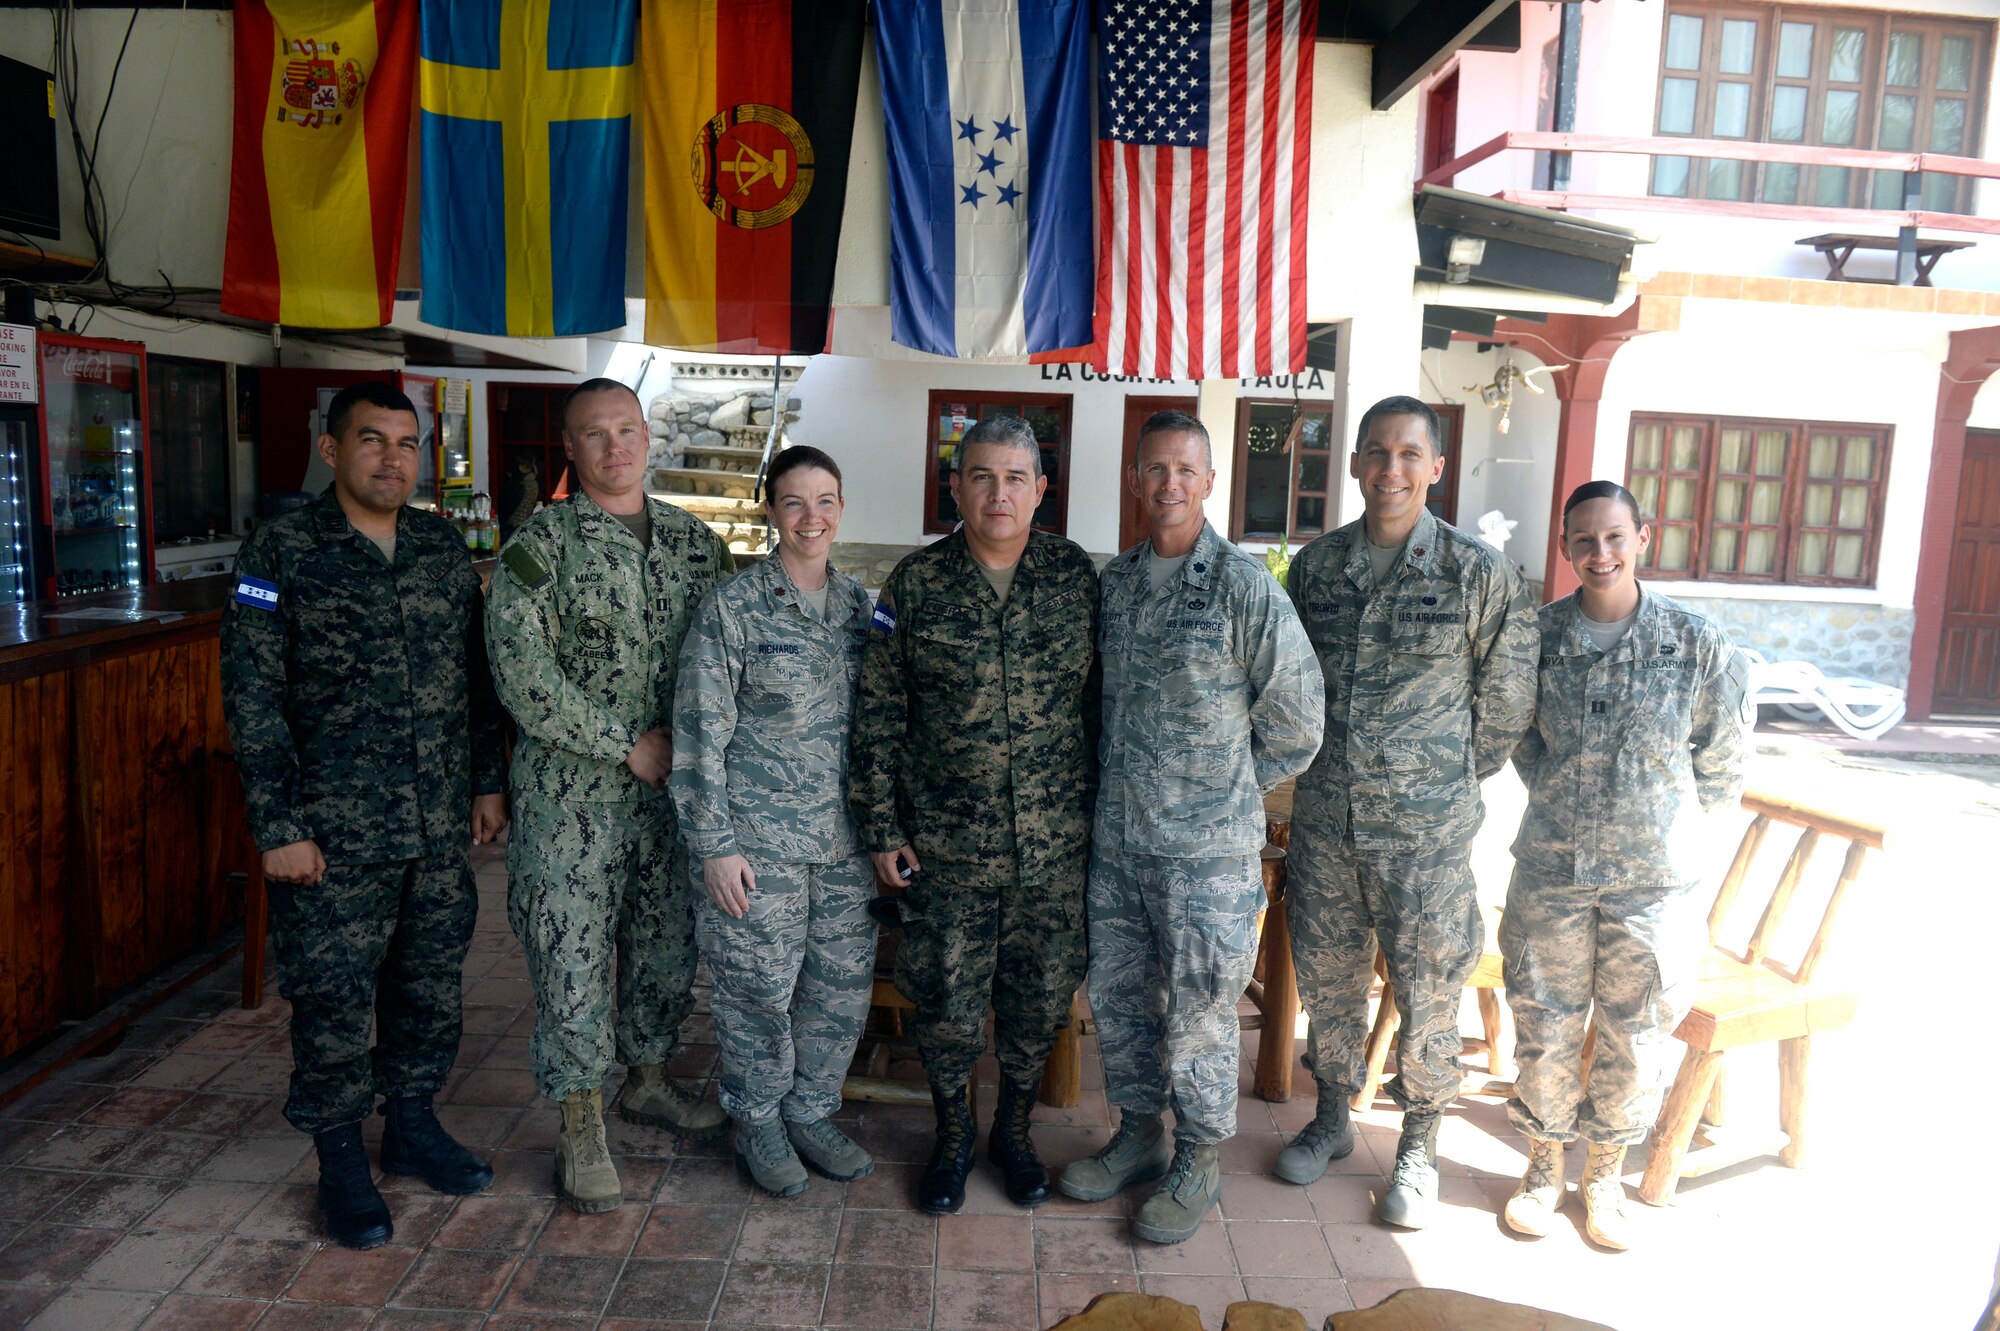 Honduran Army leadership poses with New Horizons Honduras 2015 leadership in a group photo in Trujillo, Honduras, May 30, 2015. New Horizons was launched in the 1980s and is an annual joint humanitarian assistance exercise that U.S. Southern Command conducts with a partner nation in Central America, South America or the Caribbean. The exercise improves joint training readiness of U.S. and partner nation civil engineers, medical professionals and support personnel through humanitarian assistance activities. (U.S. Air Force photo by Capt. David J. Murphy/Released)